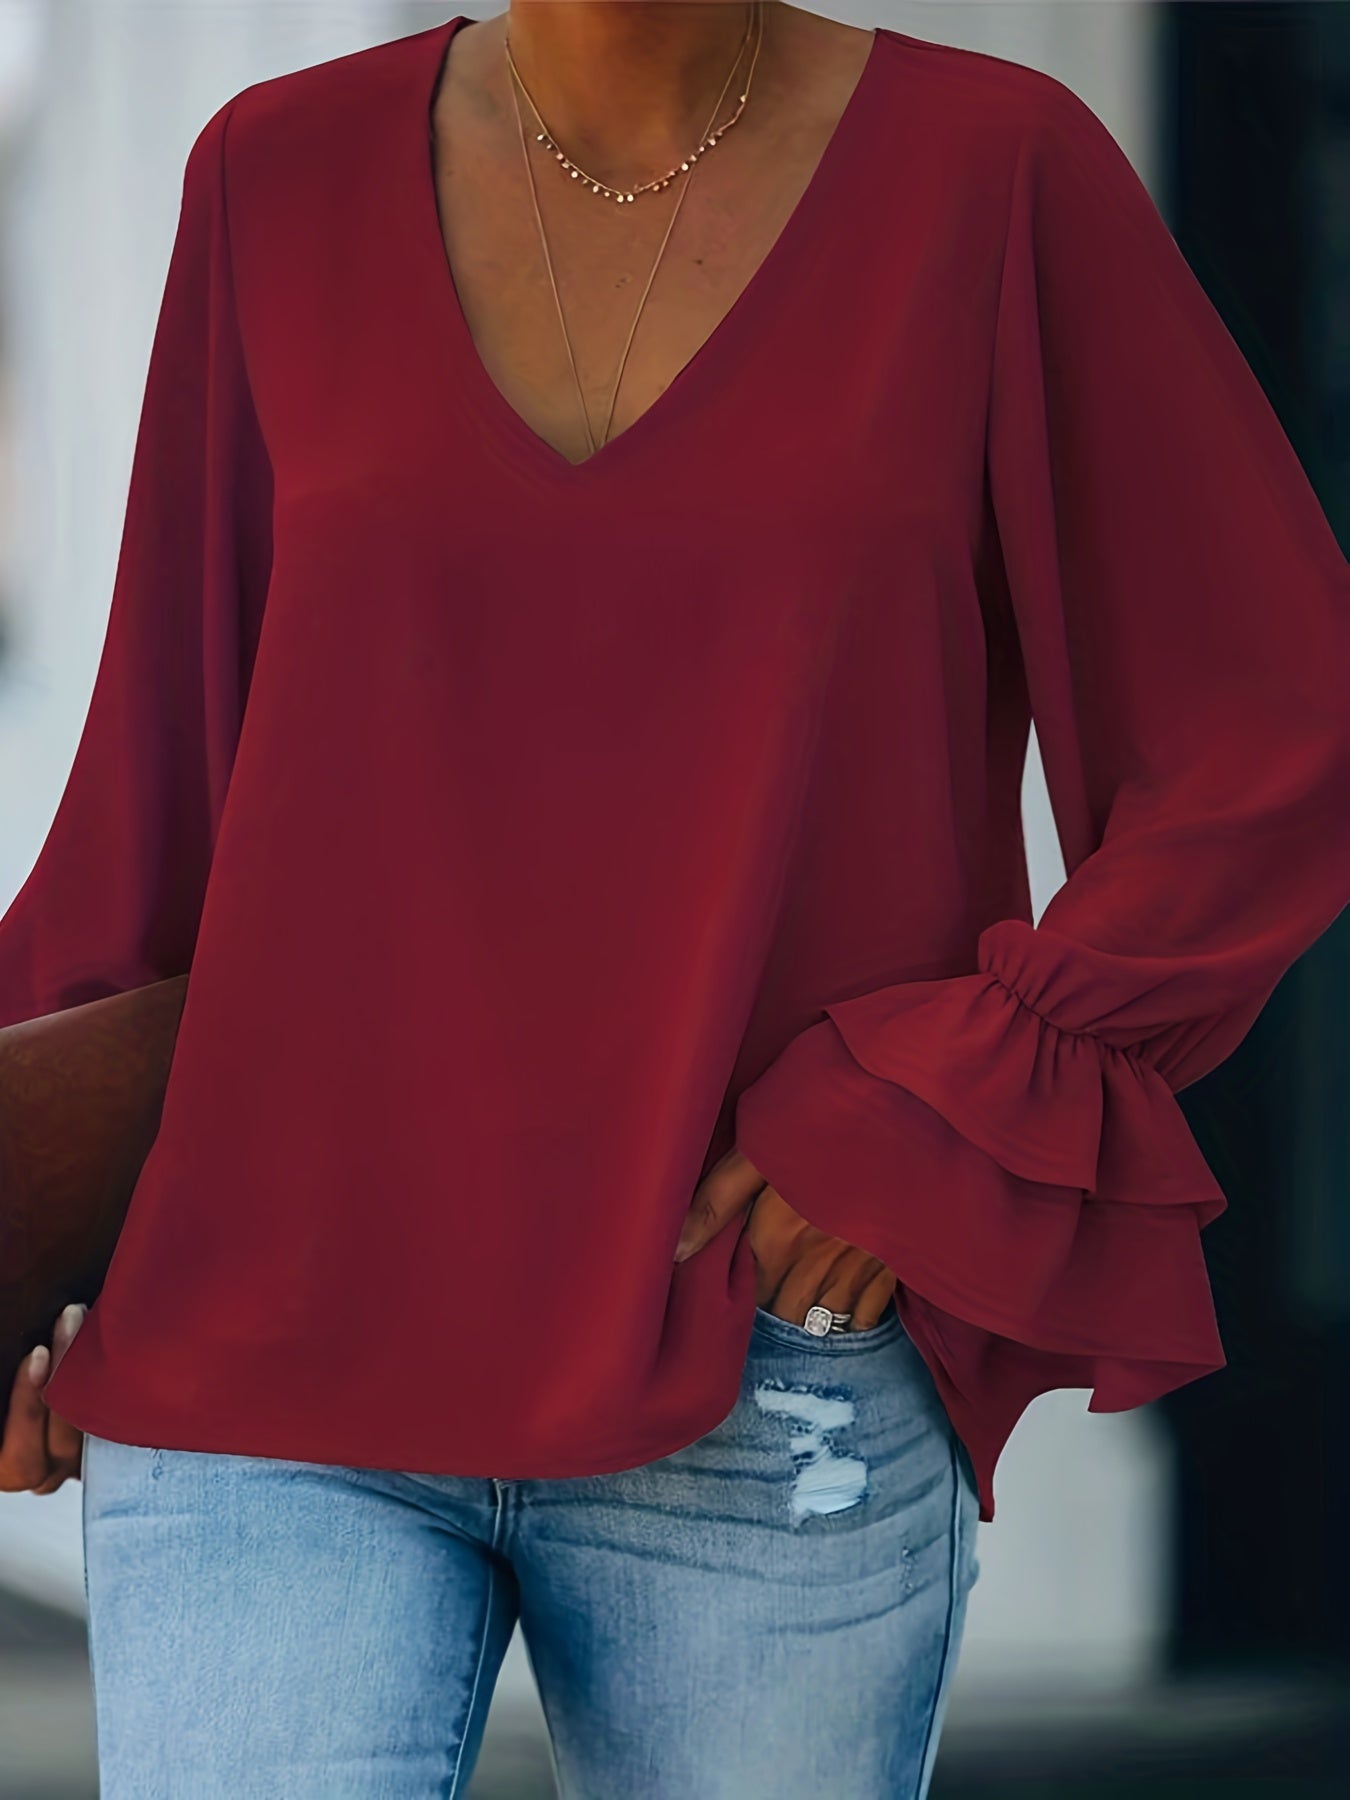 Plus Size Casual Top, Women's Plus Solid Layered Ruffle Trim Lantern Sleeve V Neck Slight Stretch Top